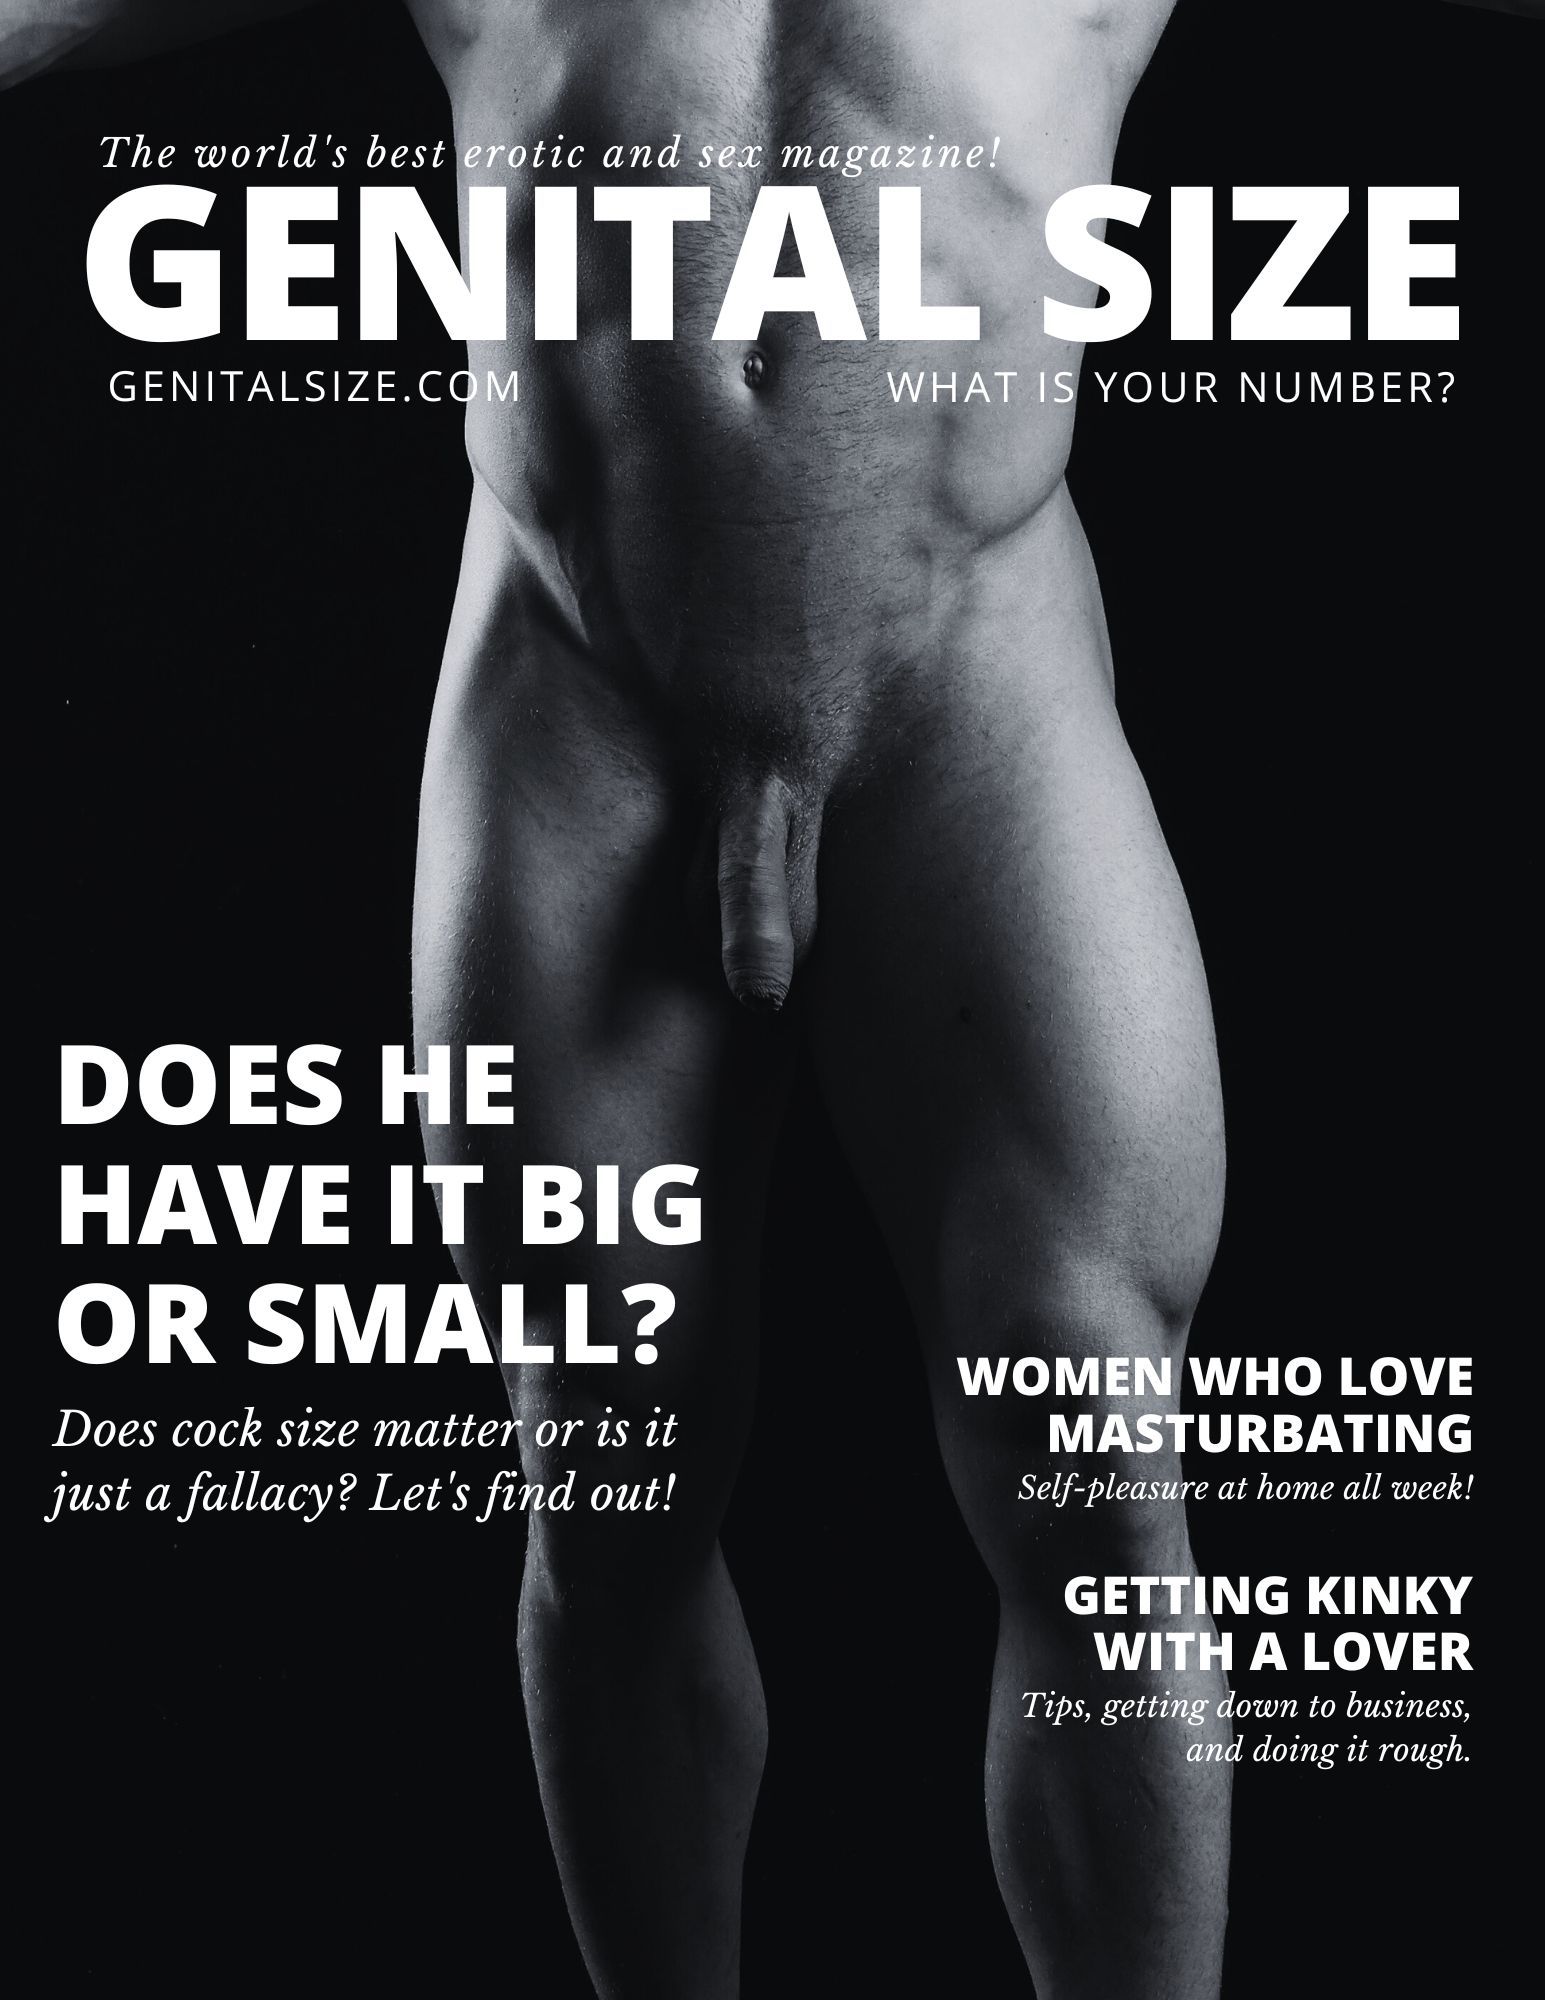 Magazine cover featuring a nude male torso, asking the question how big is his penis?